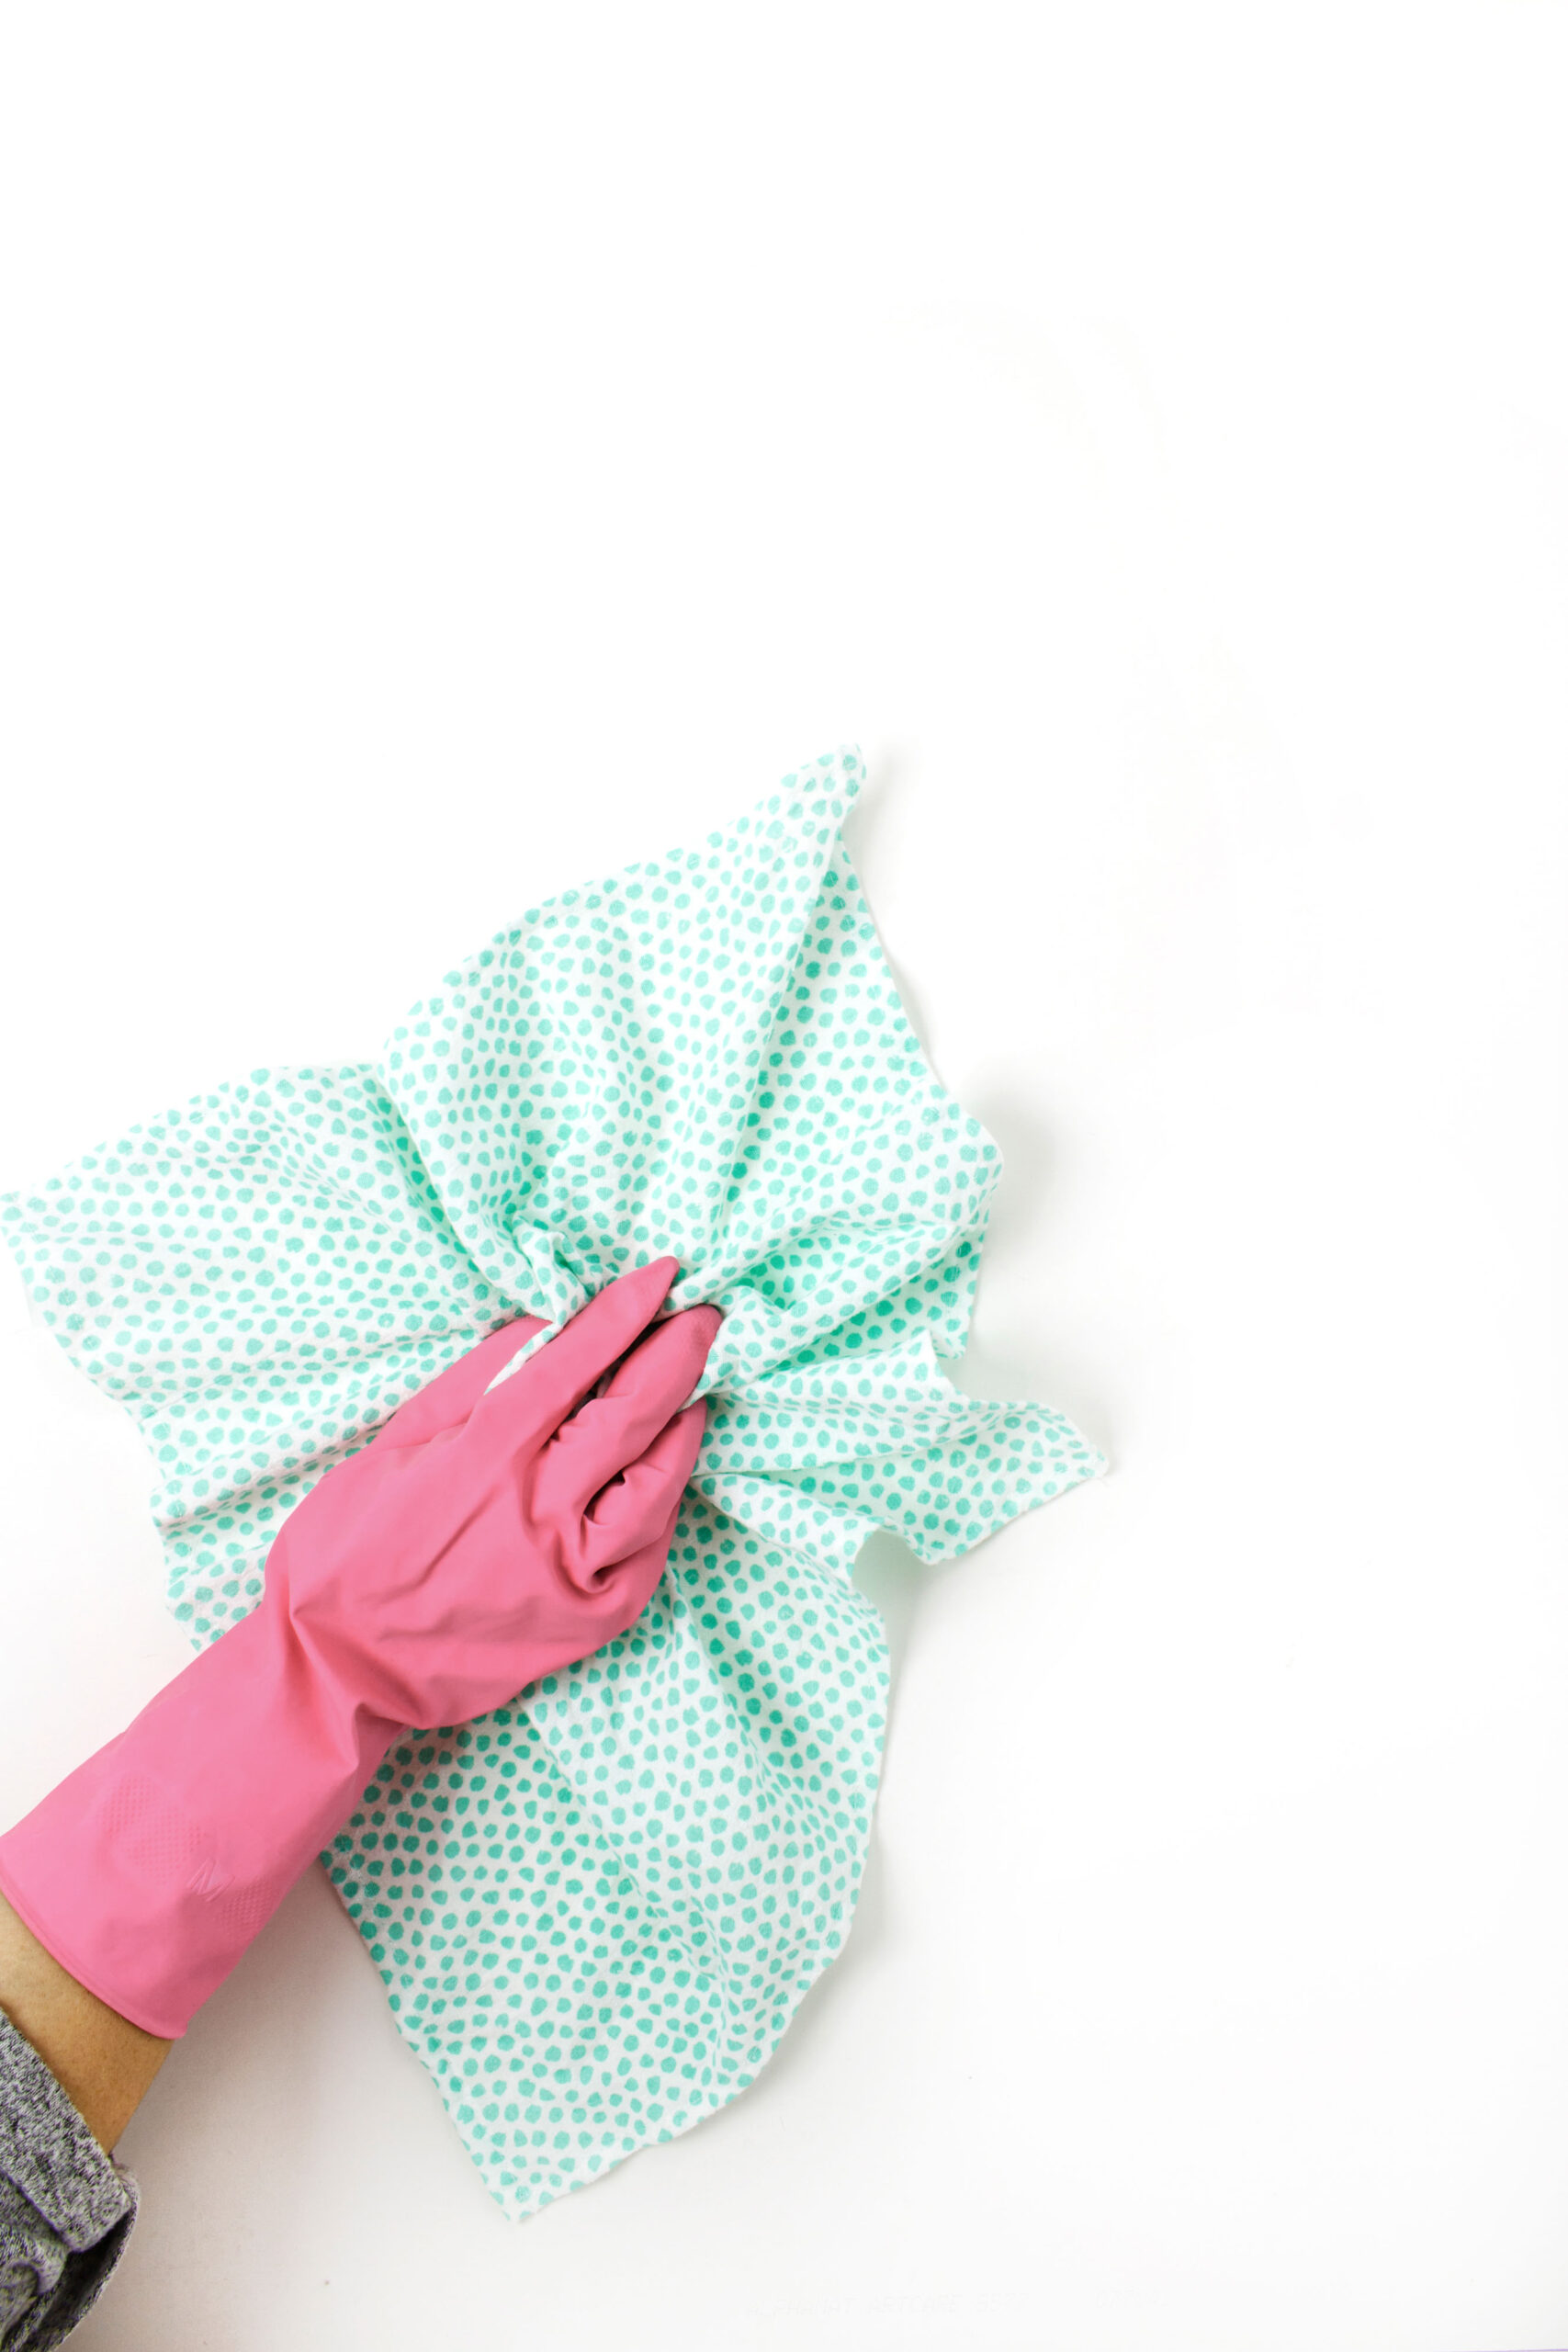 pink gloved hand holding a green and white cleaning cloth